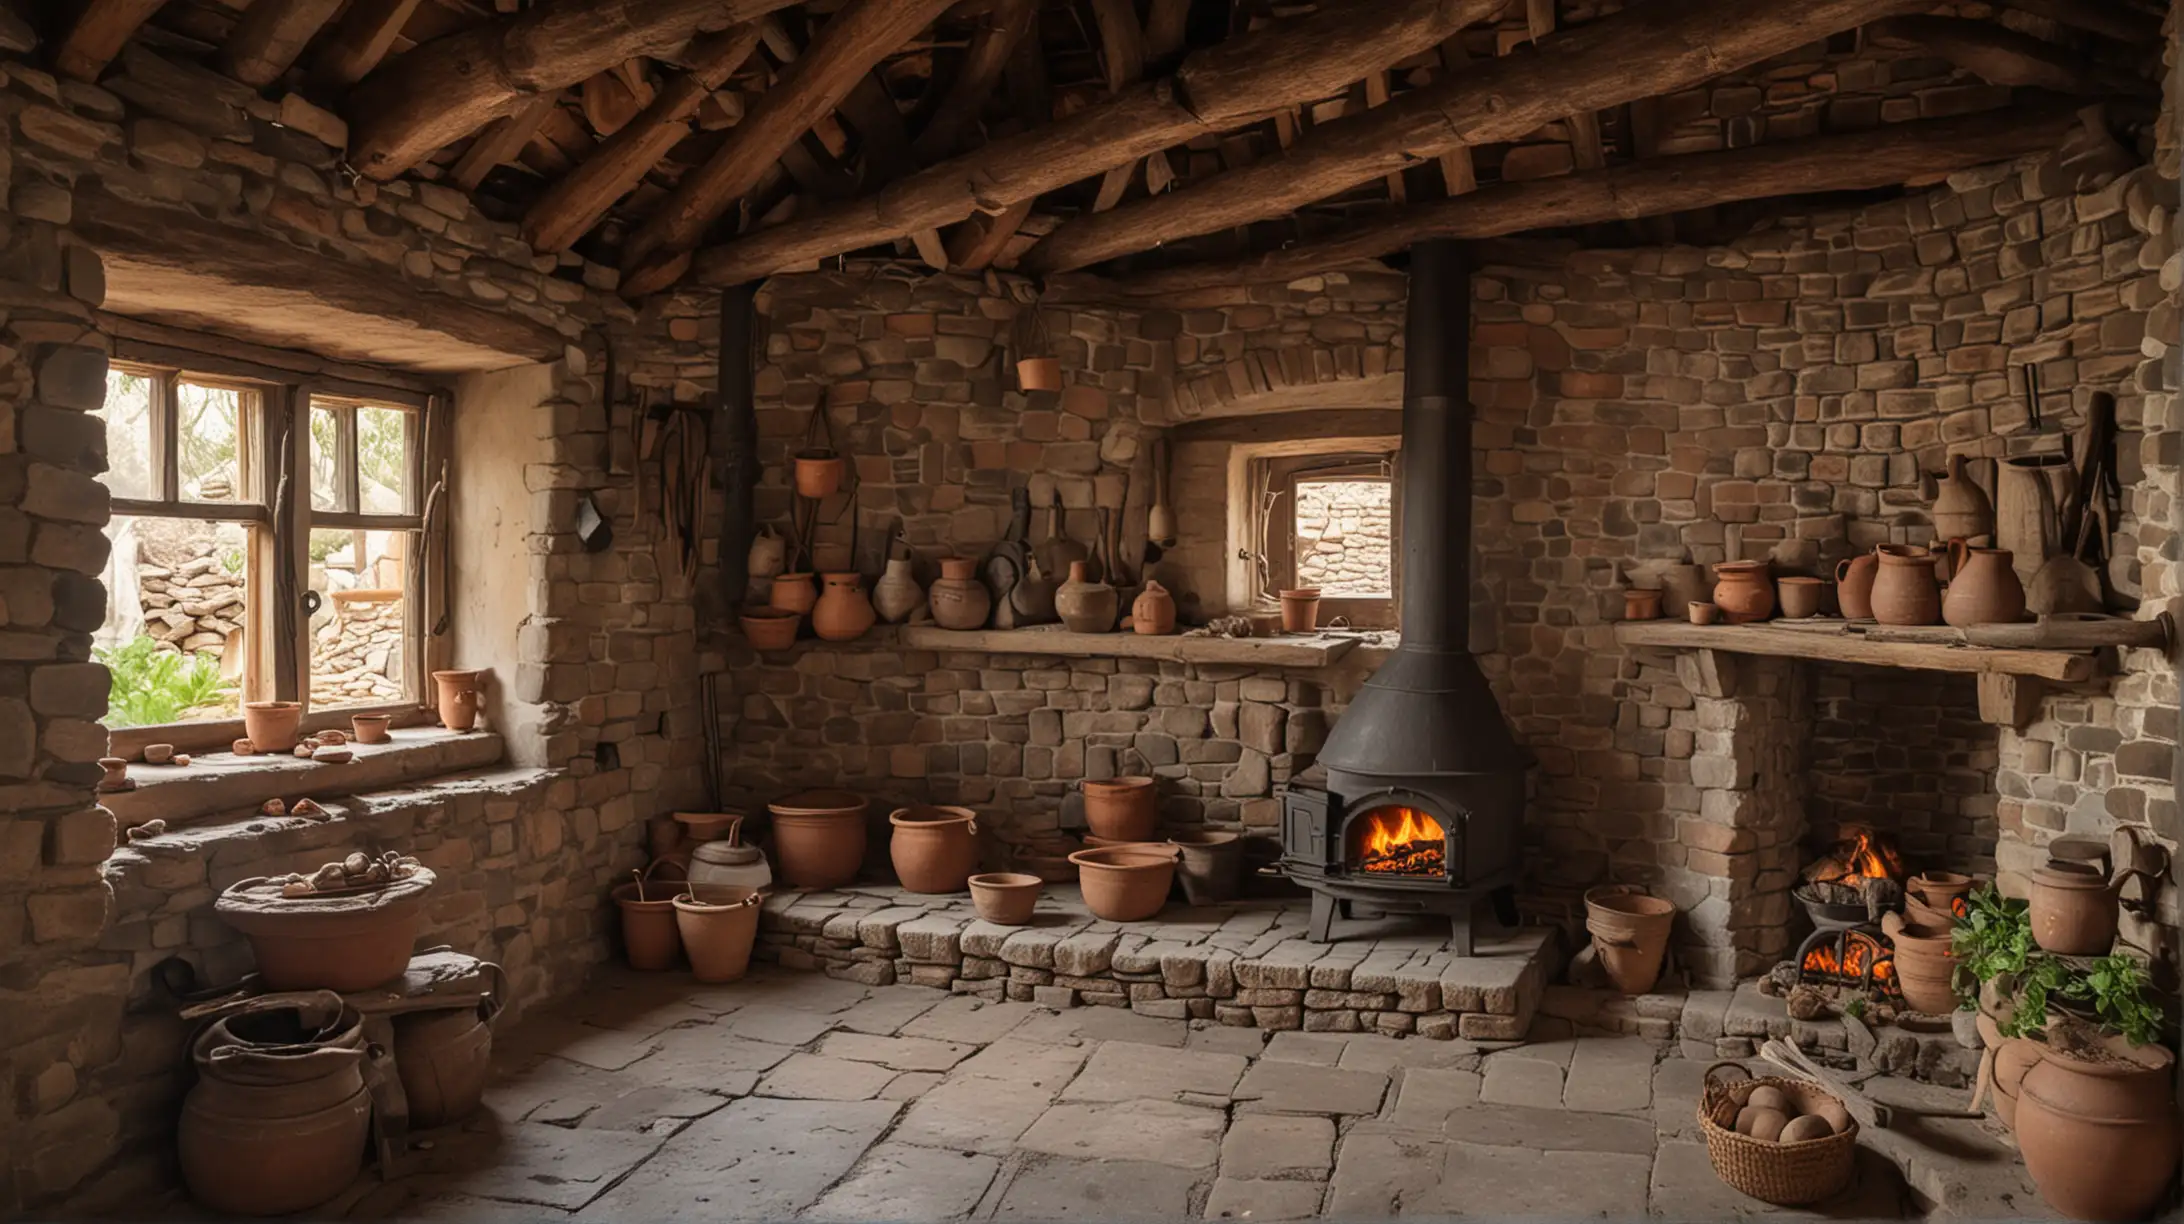 Medieval Hut with Clay Pots and Brick Stove